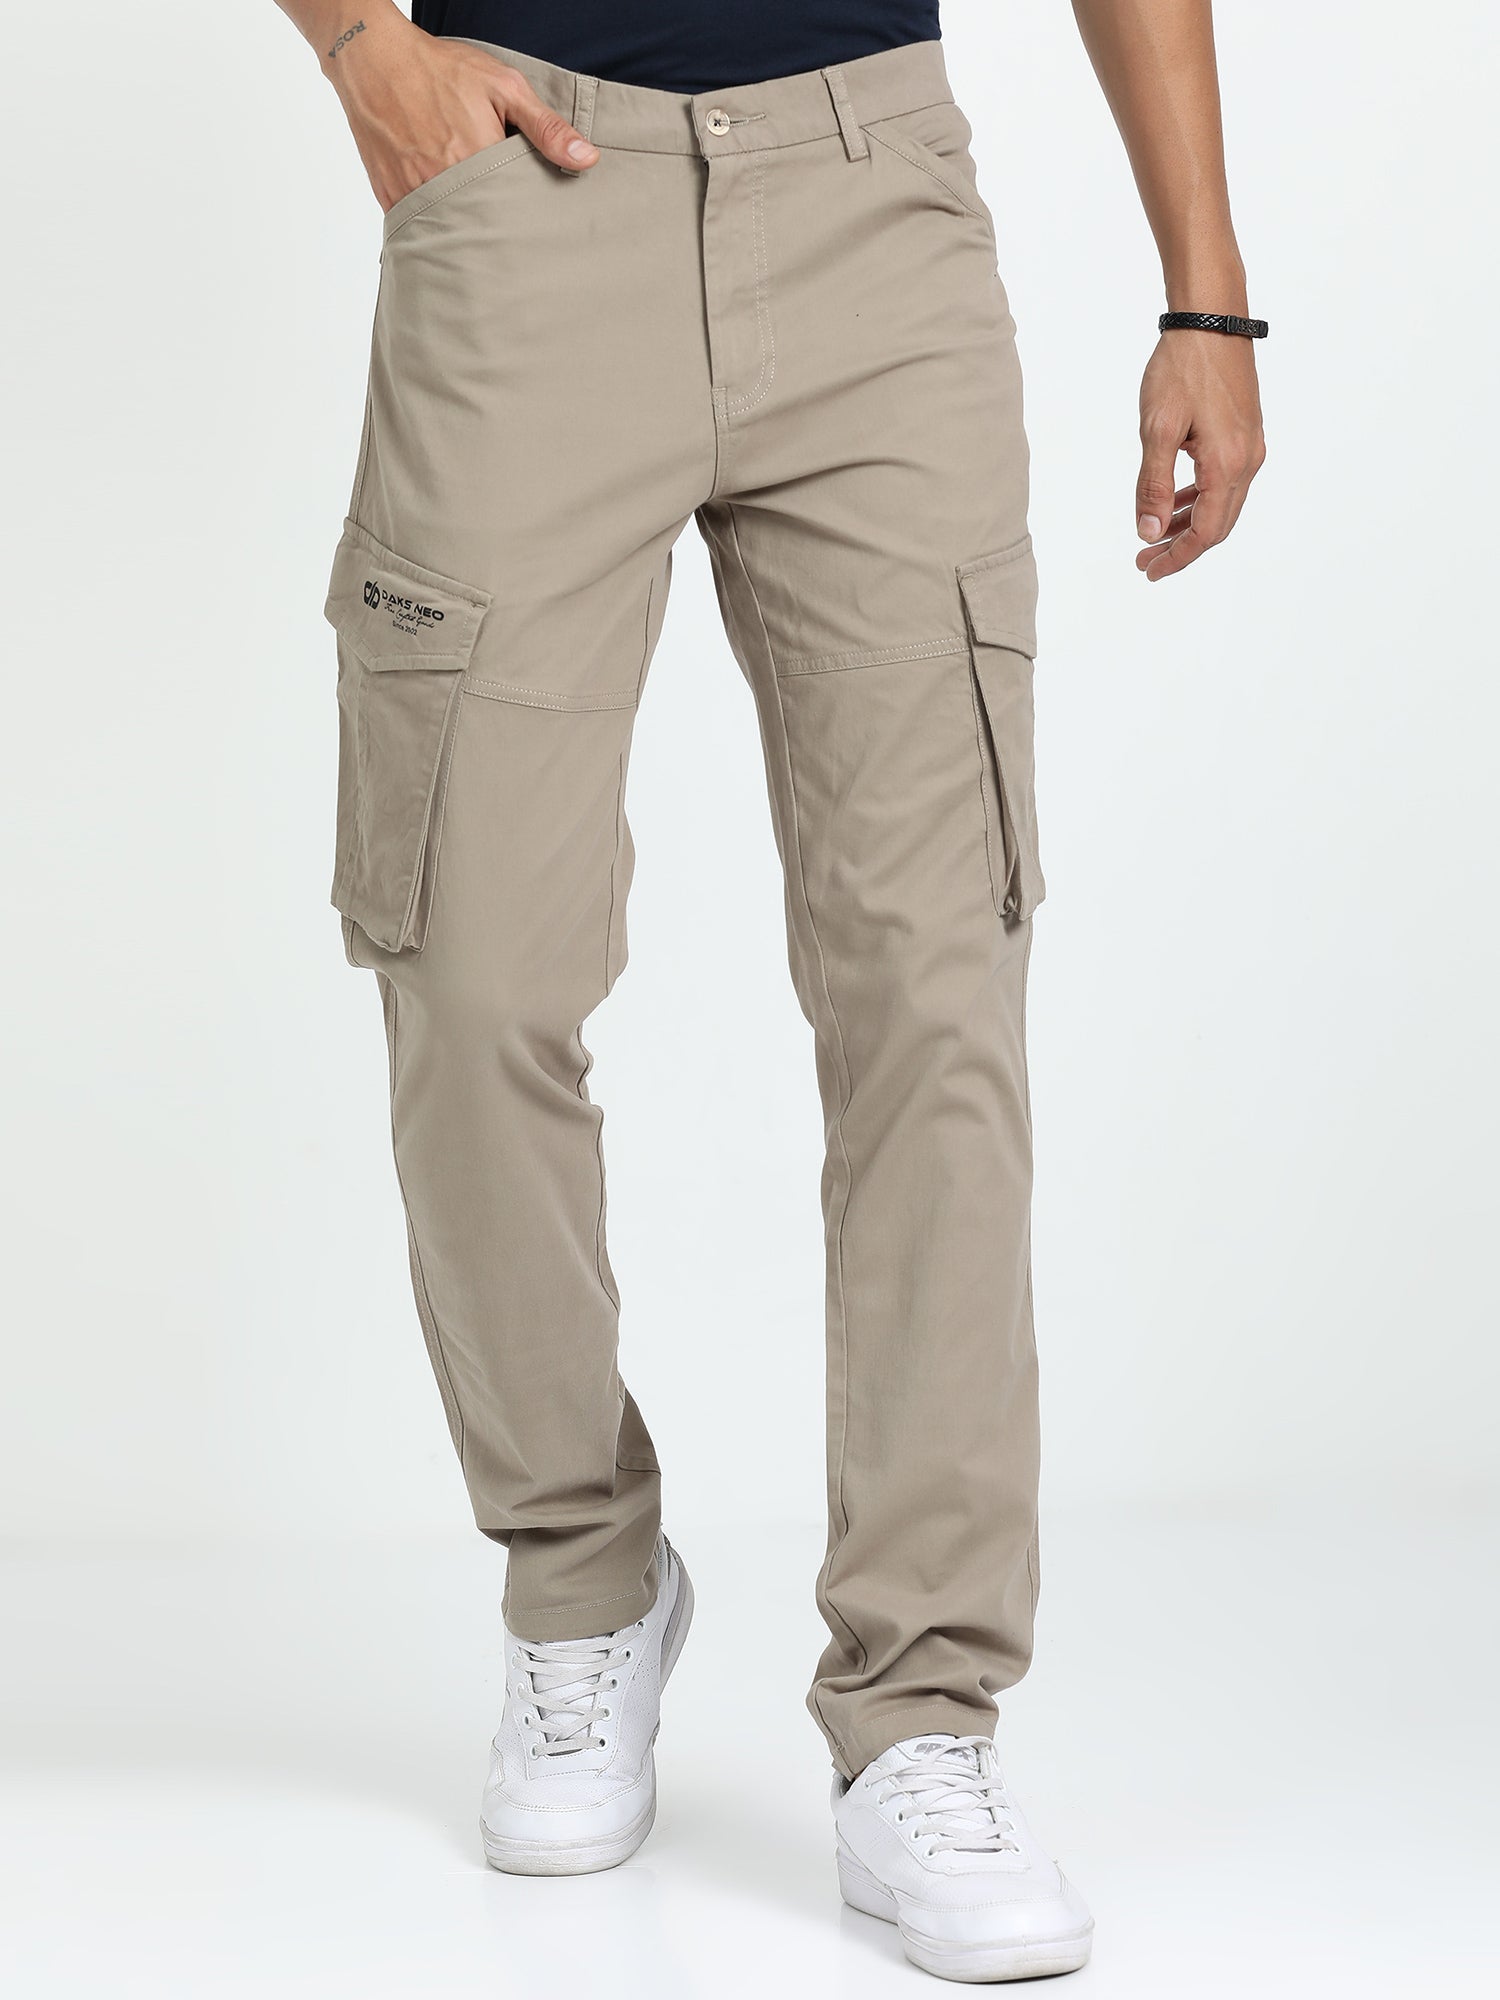 Check styling ideas for「Cargo Pants」| UNIQLO US